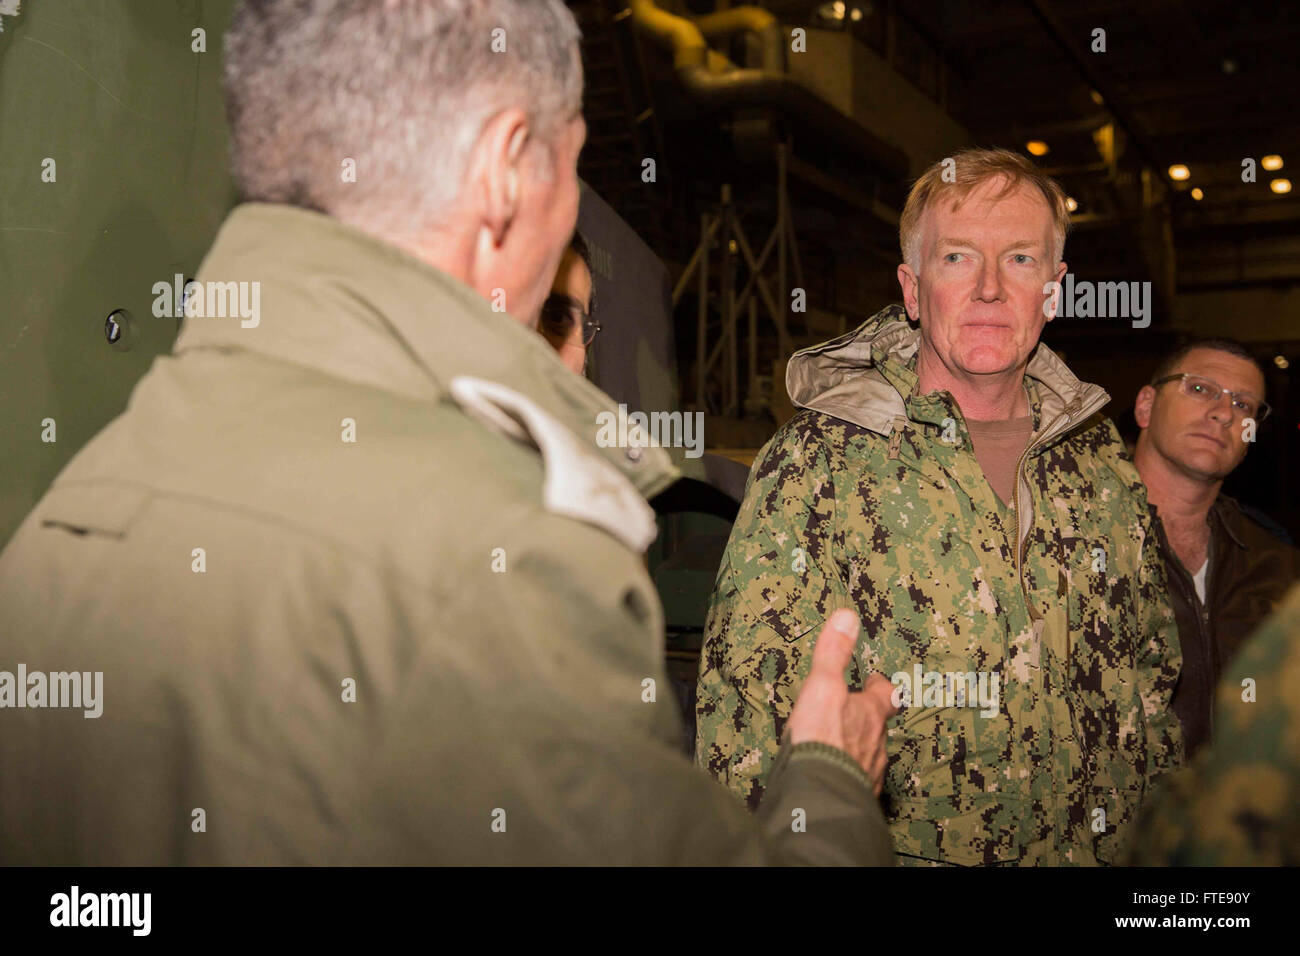 150104-M-YH418-046 MEDITERRANEAN SEA (Jan. 4, 2015) Vice Adm. James Foggo, III, U.S. 6th Fleet commander, right, speaks with a guest with the Israel Defense Force in the well deck aboard USS New York (LPD 21) Jan. 4, 2015. New York, a San Antonio-class amphibious transport dock ship, deployed as part of the Iwo Jima Amphibious Ready Group/24th Marine Expeditionary Unit, is conducting naval operations in the U.S. 6th Fleet area of operations in support of U.S. national security interests in Europe. (U.S. Marine Corps photo by Cpl. Todd F. Michalek/Released) Stock Photo